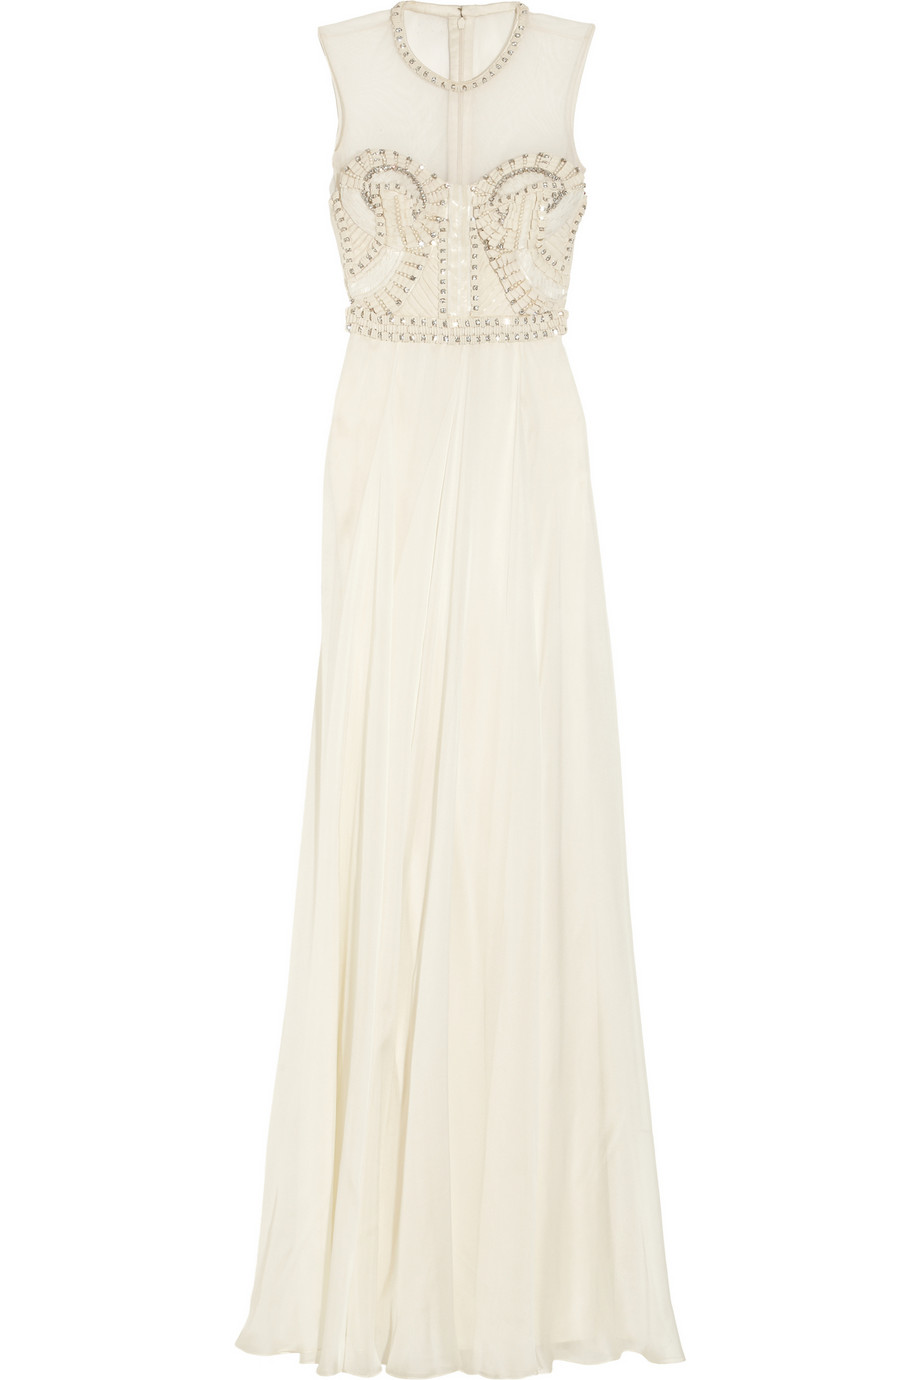 Temperley london Laurel Embellished Tulle Satin and Chiffon Gown in ...